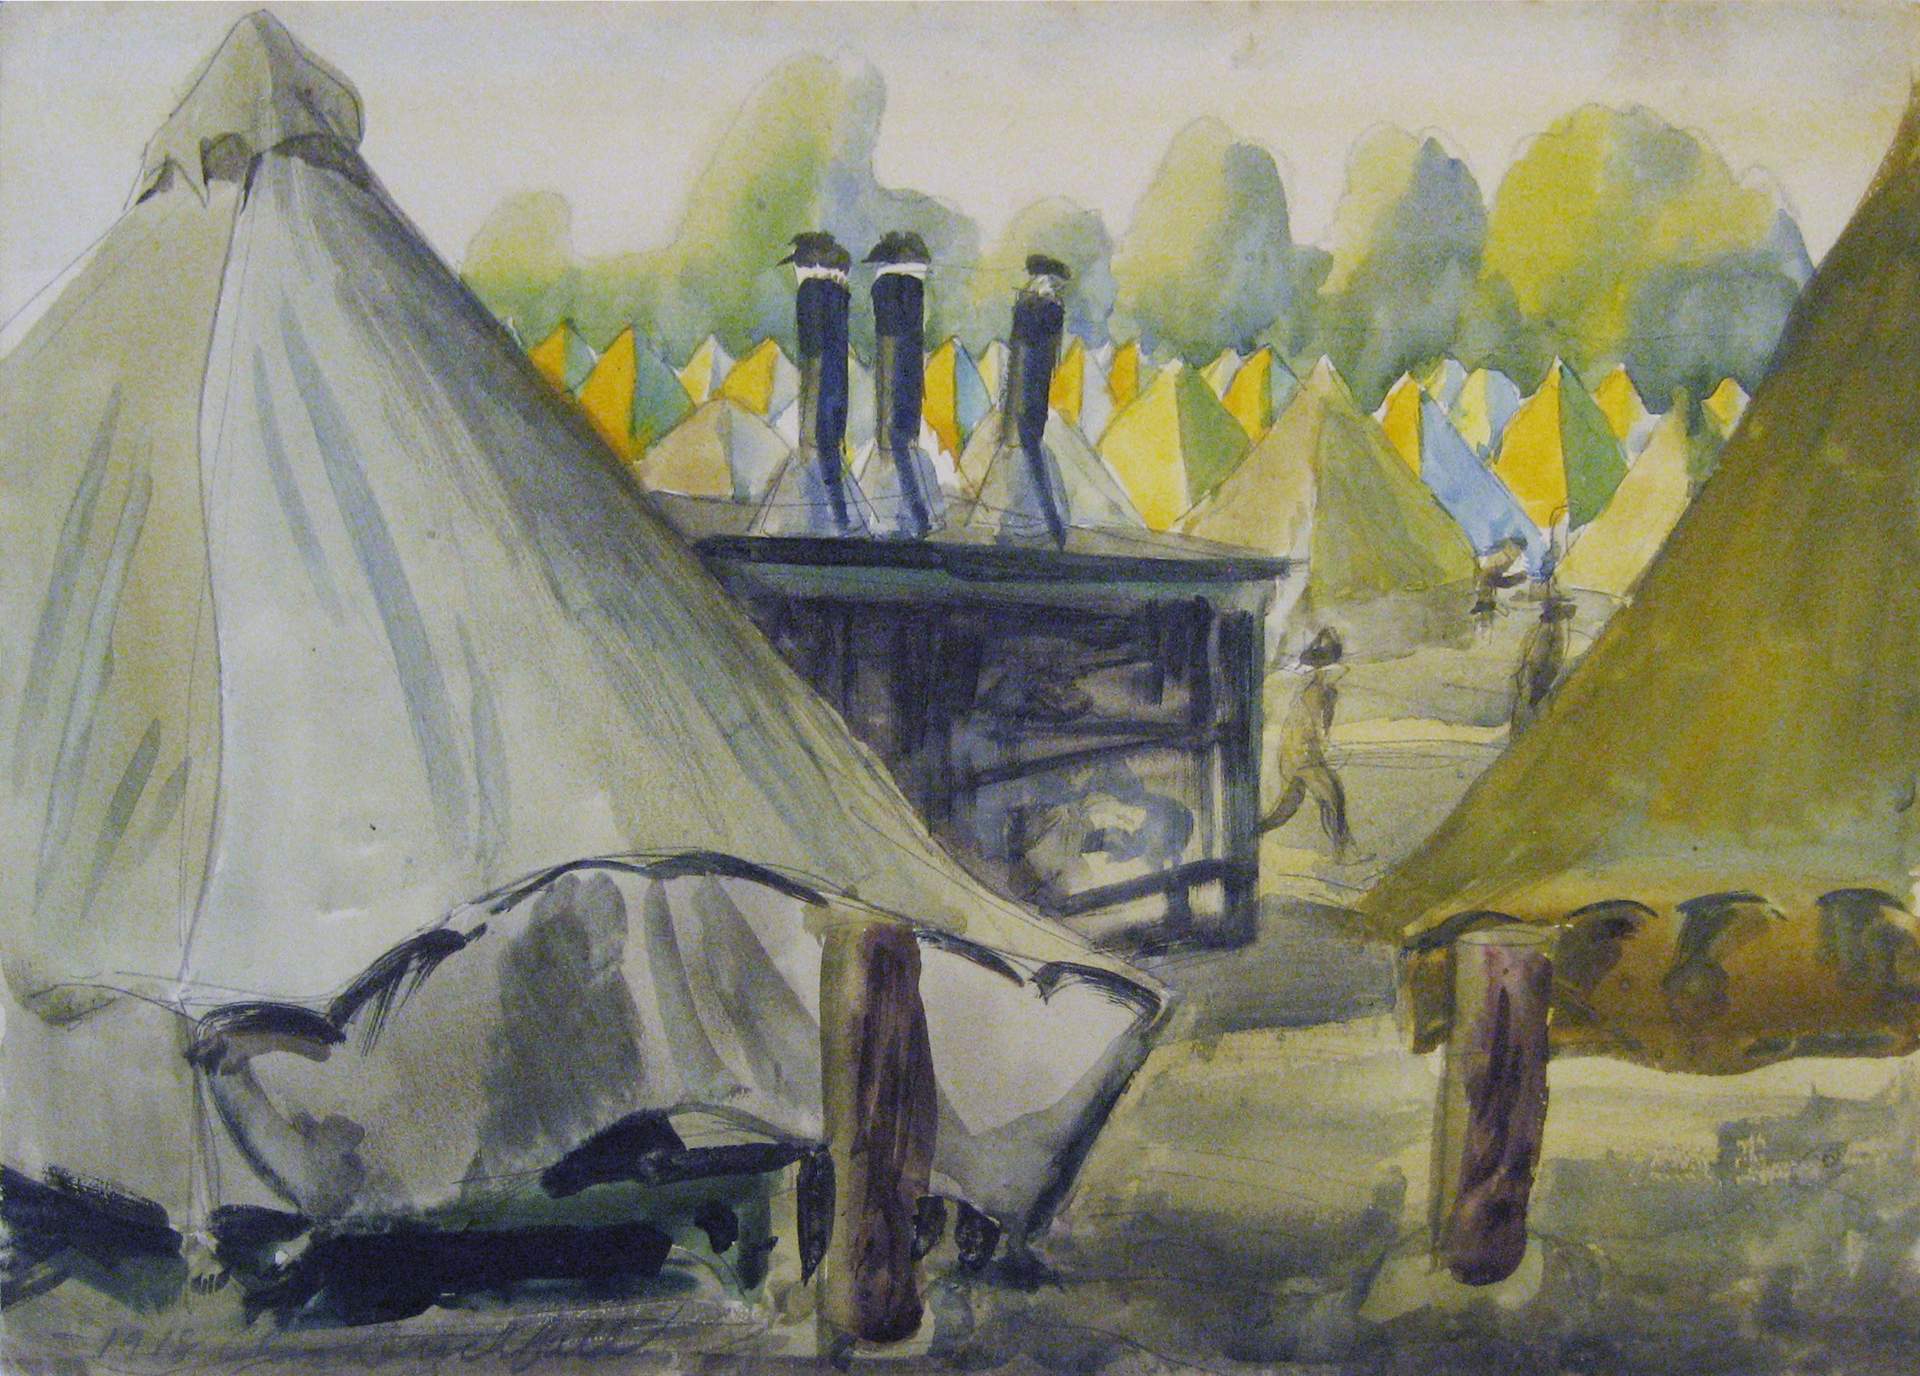 Camp Jackson, South Carolina (Army Tents with Outdoor Ovens)